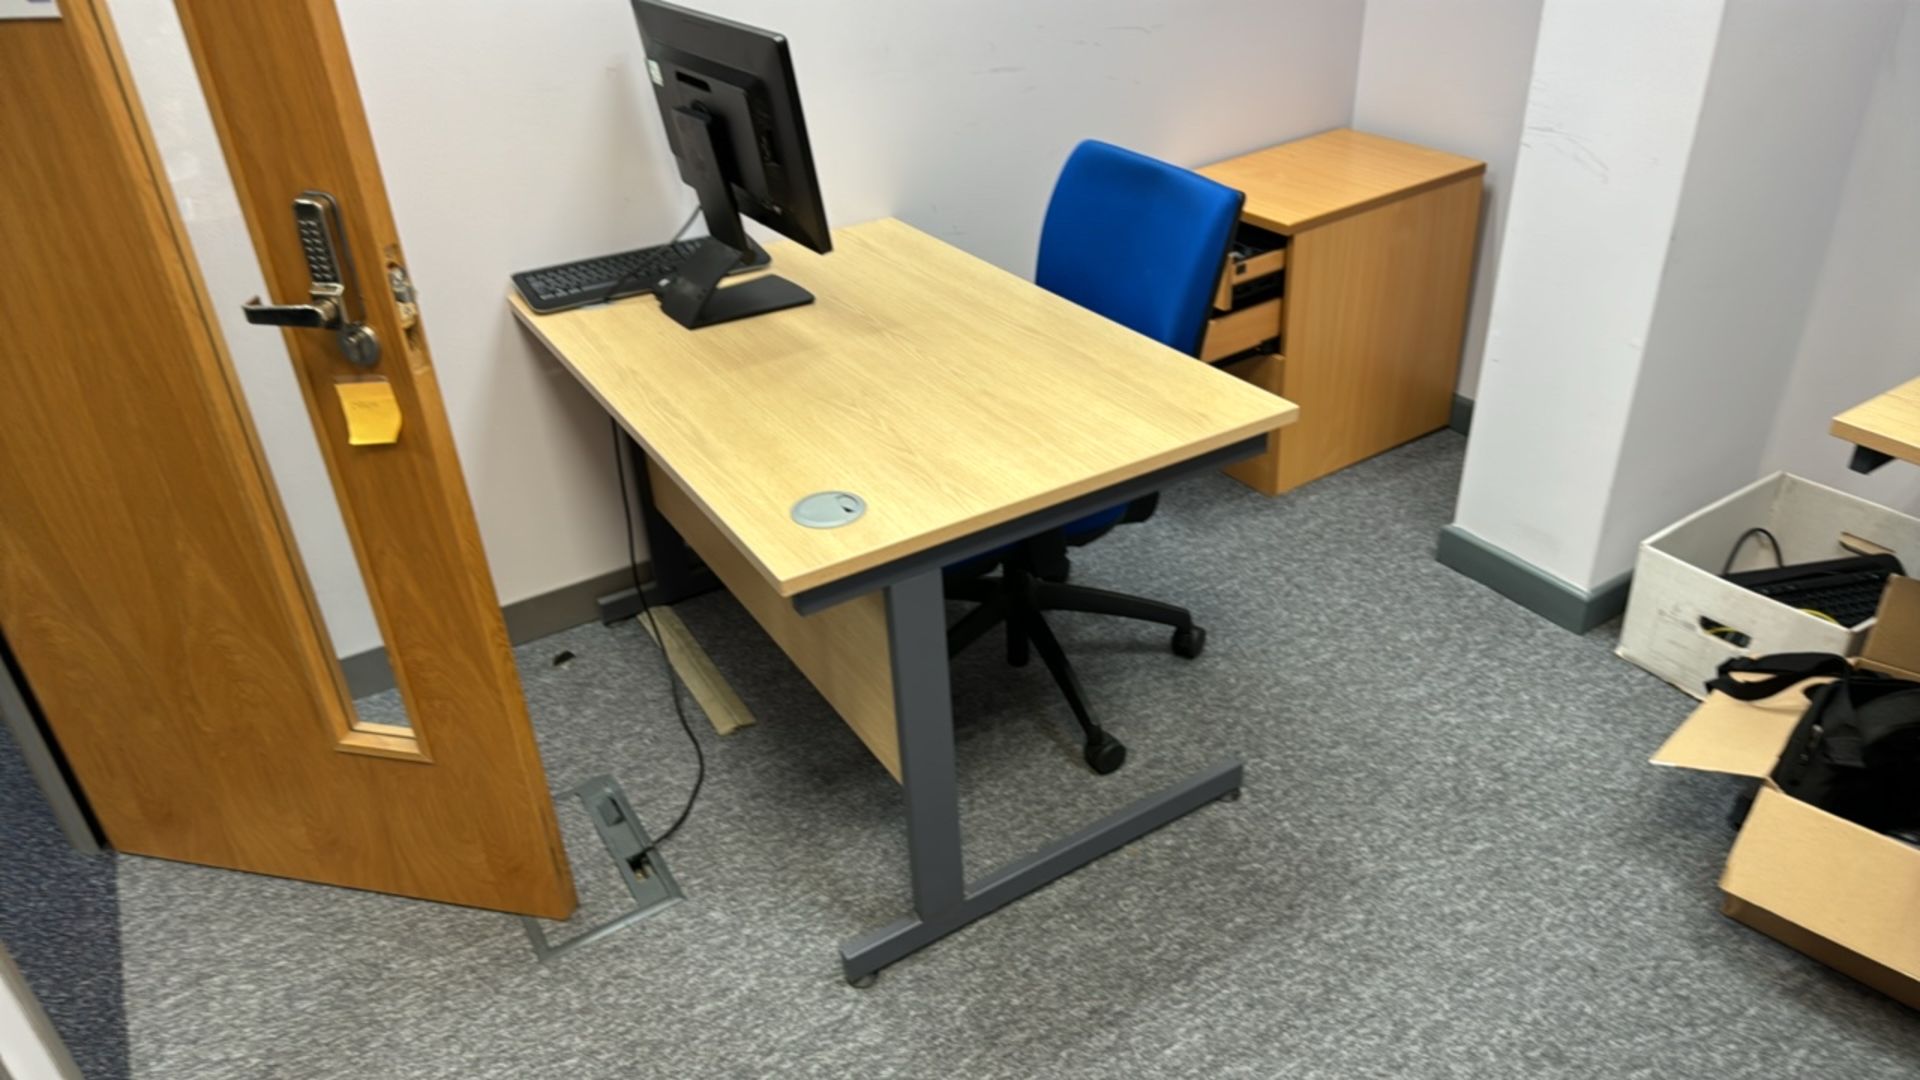 ref 240 - Office Contents - Image 2 of 6